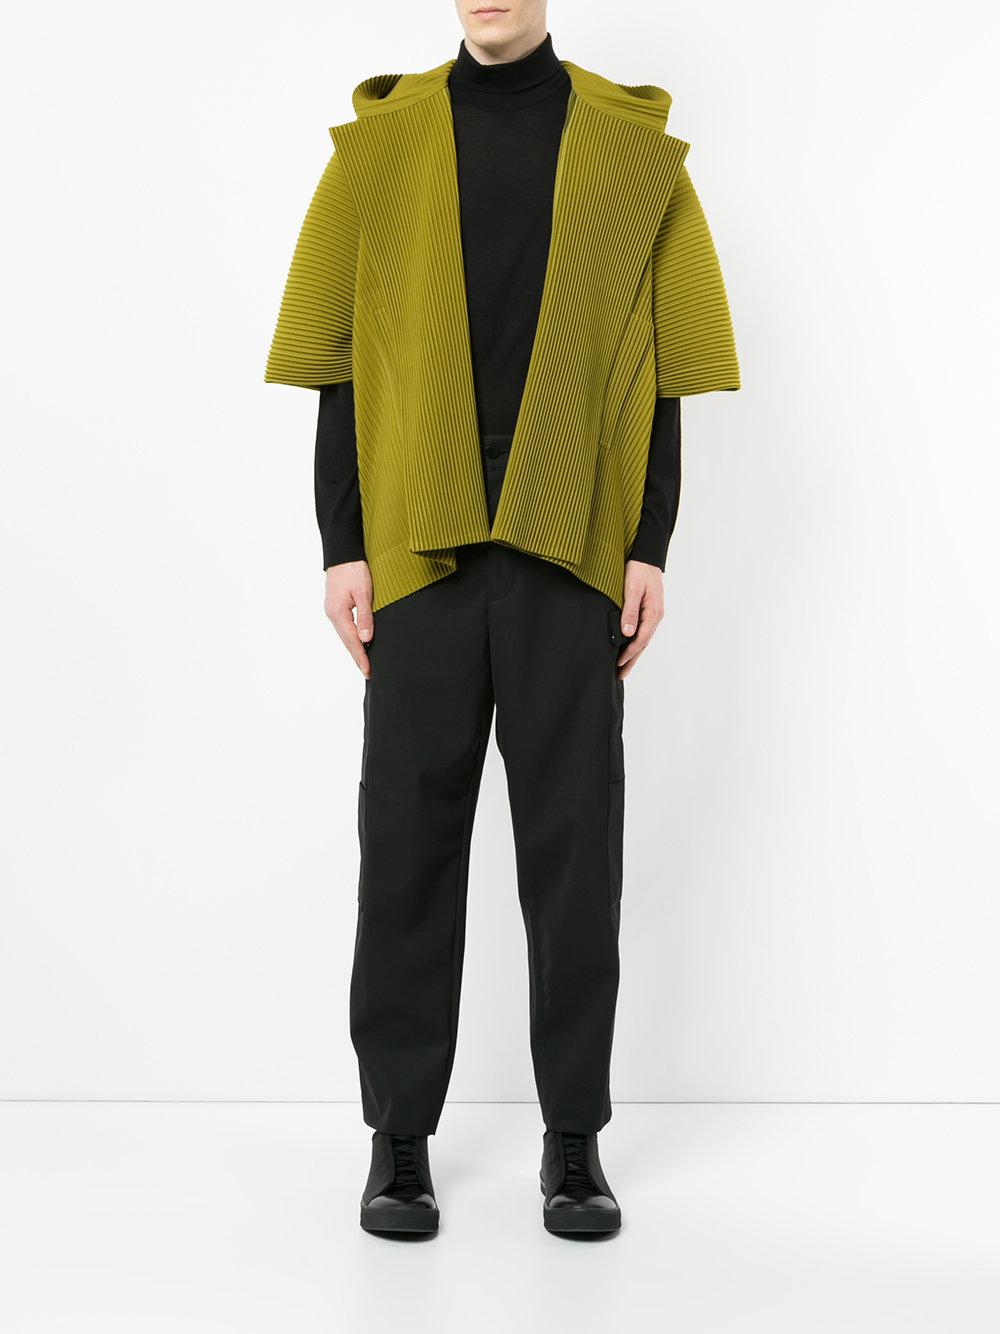 Homme Plissé Issey Miyake Pleated Hooded Jacket in Green for Men - Lyst